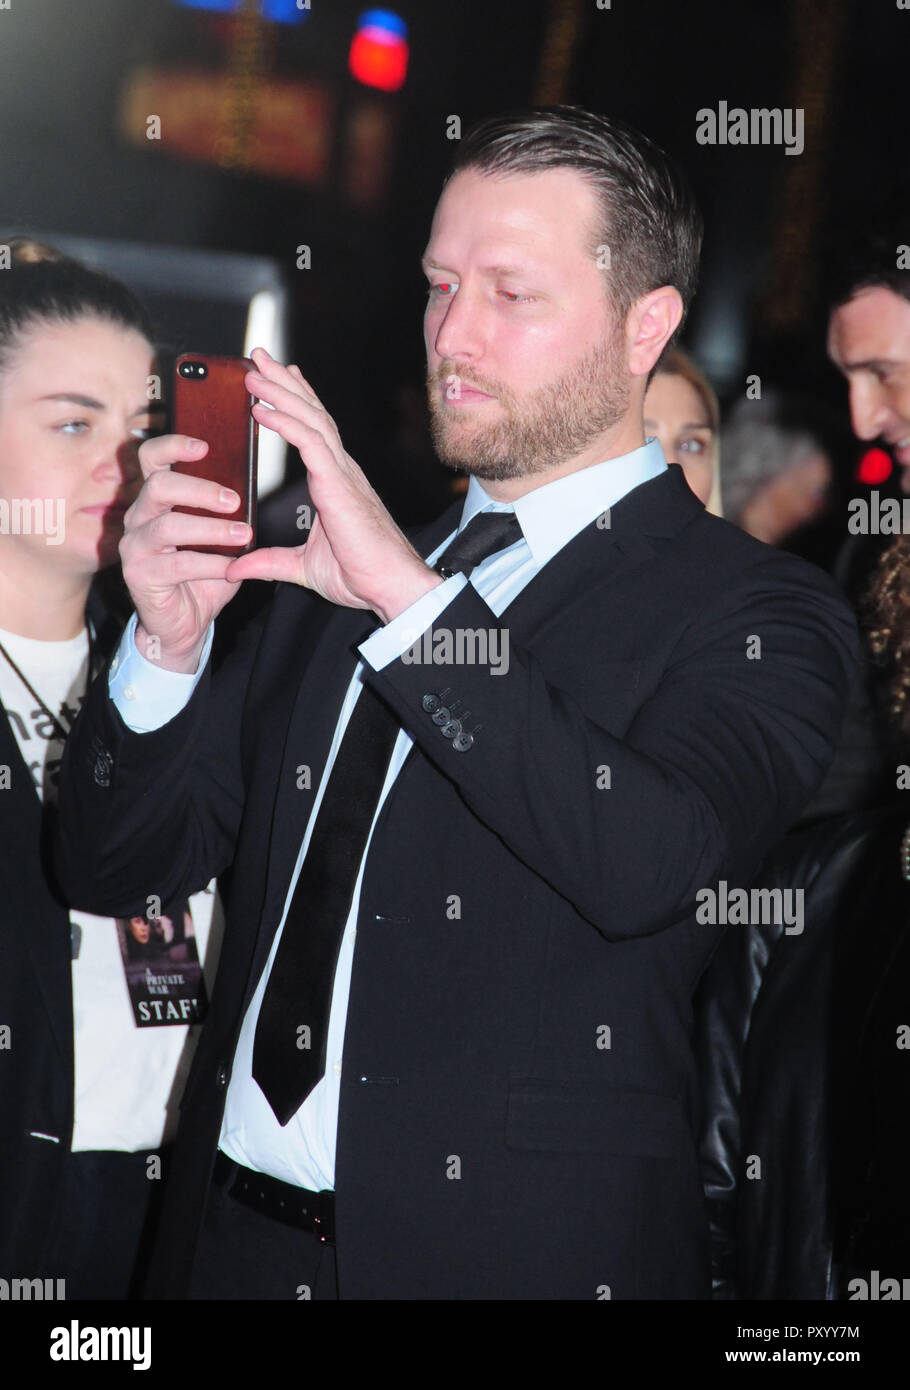 Beverly Hills, California, USA. 24th October, 2018. Director Matthew Heineman attends the Los Angeles Premiere of Aviron Pictures' 'A Private War' at Samuel Goldwyn Theater in Beverly Hills, California. Photo by Barry King/Alamy Live News Stock Photo